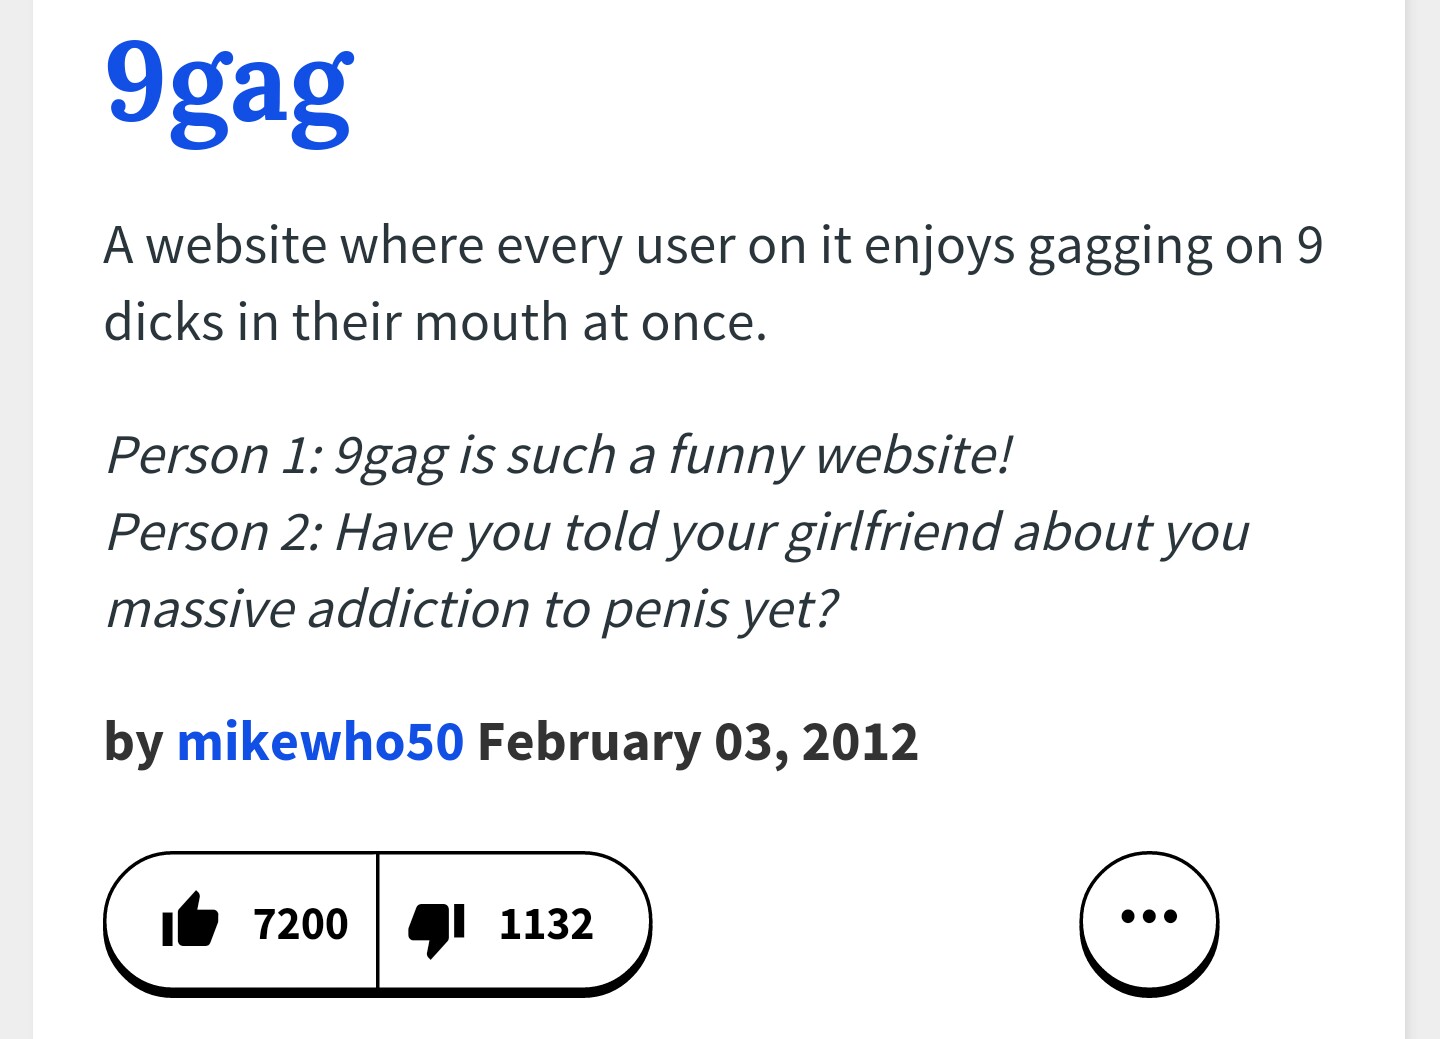 urban dictionary word of the day